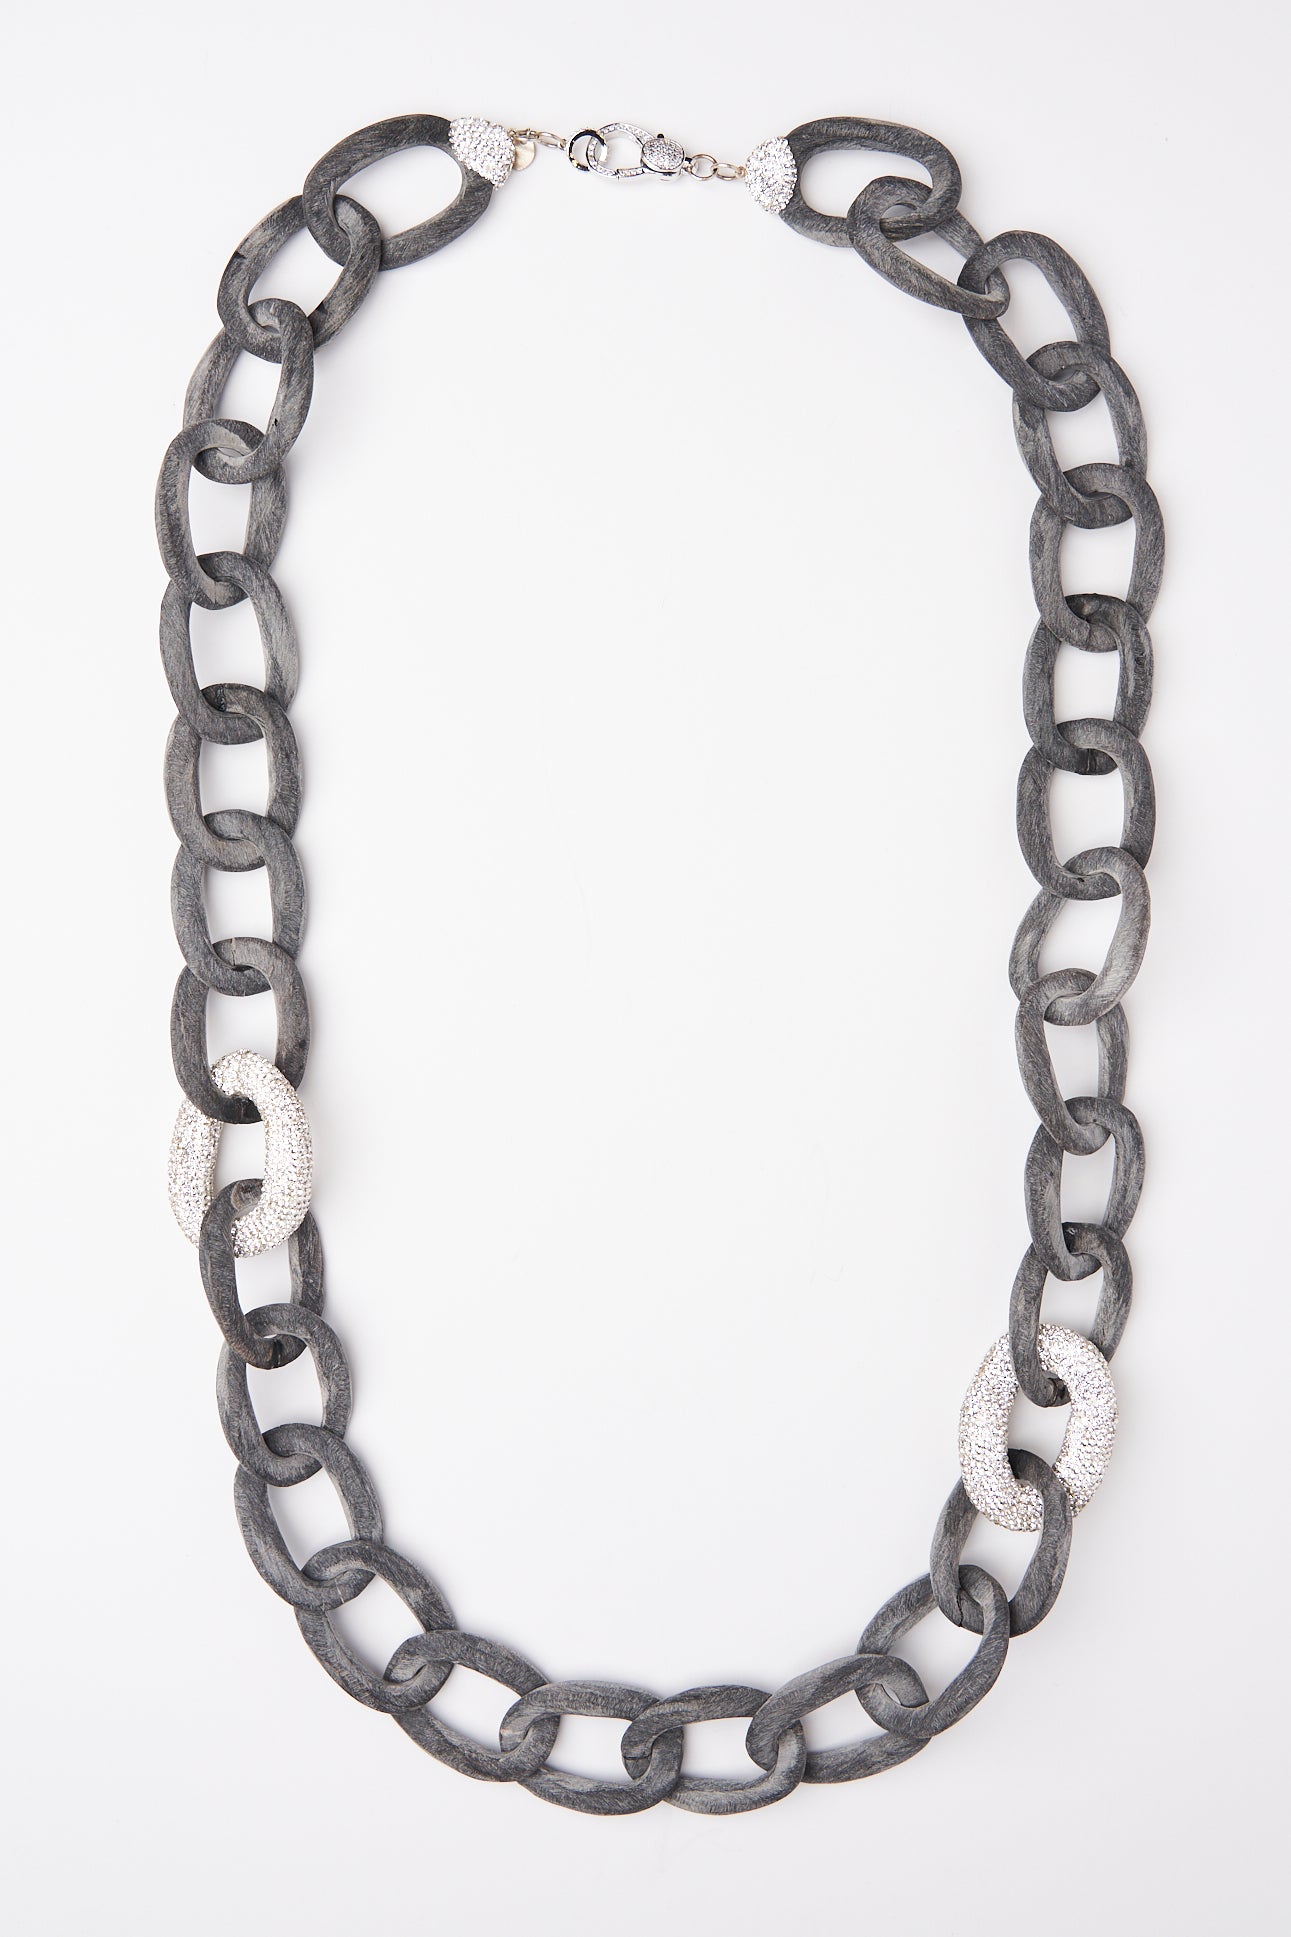 LONG CHAIN NECKLACE